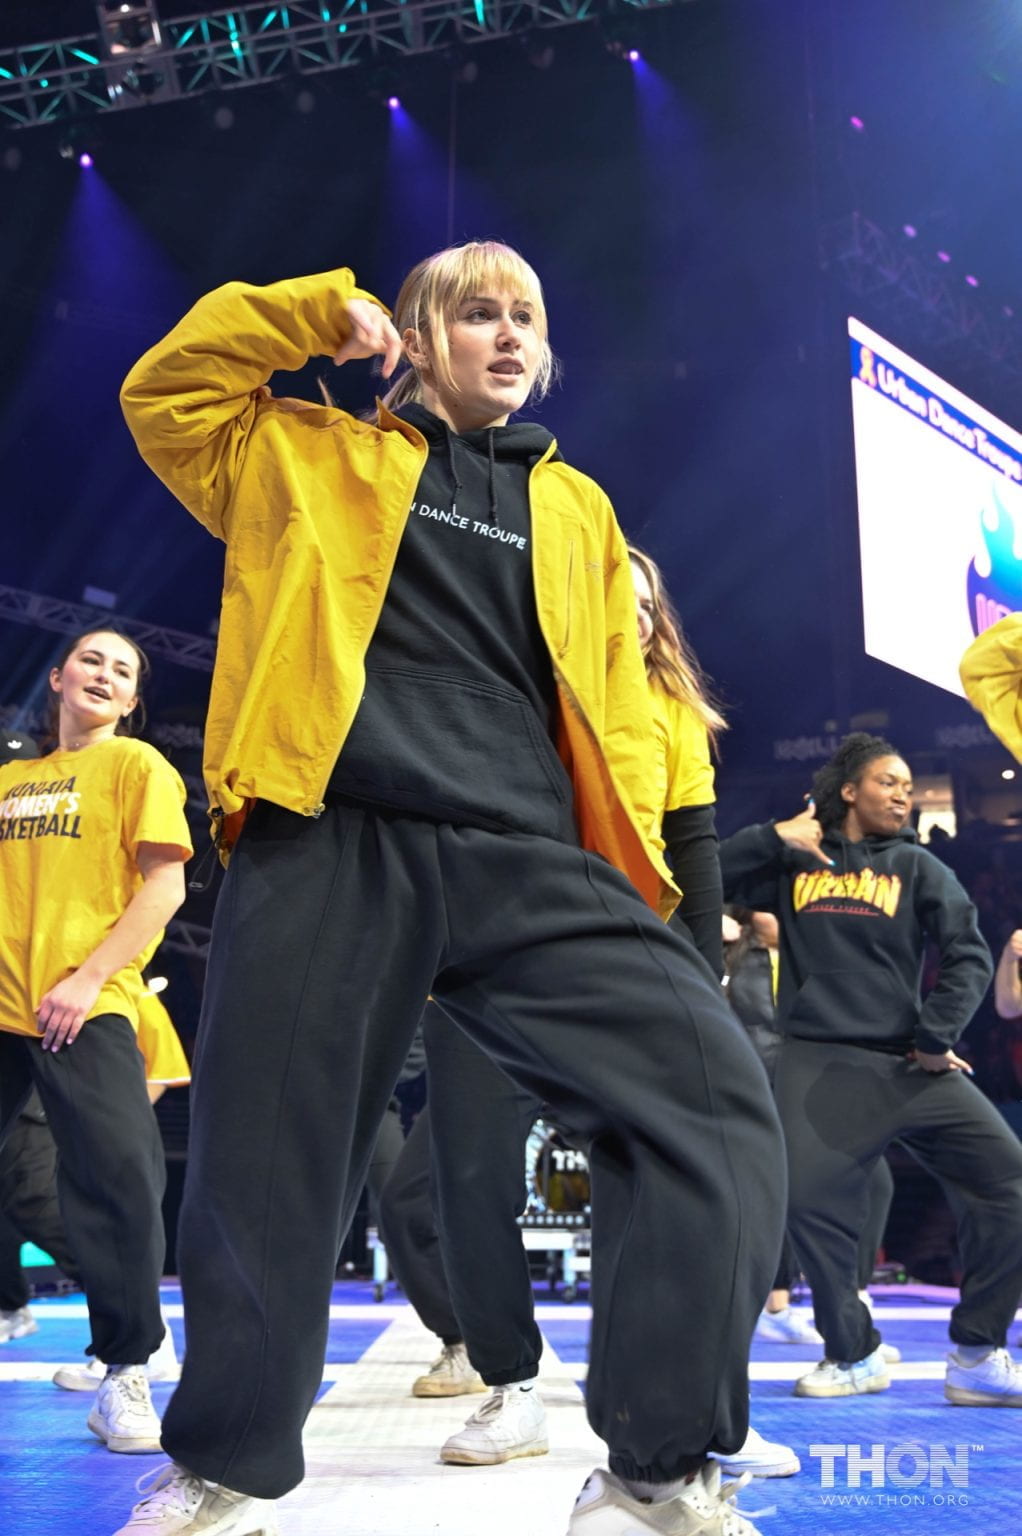 woman wearing black clothes with a yellow jacket poses with hand behind head on stage